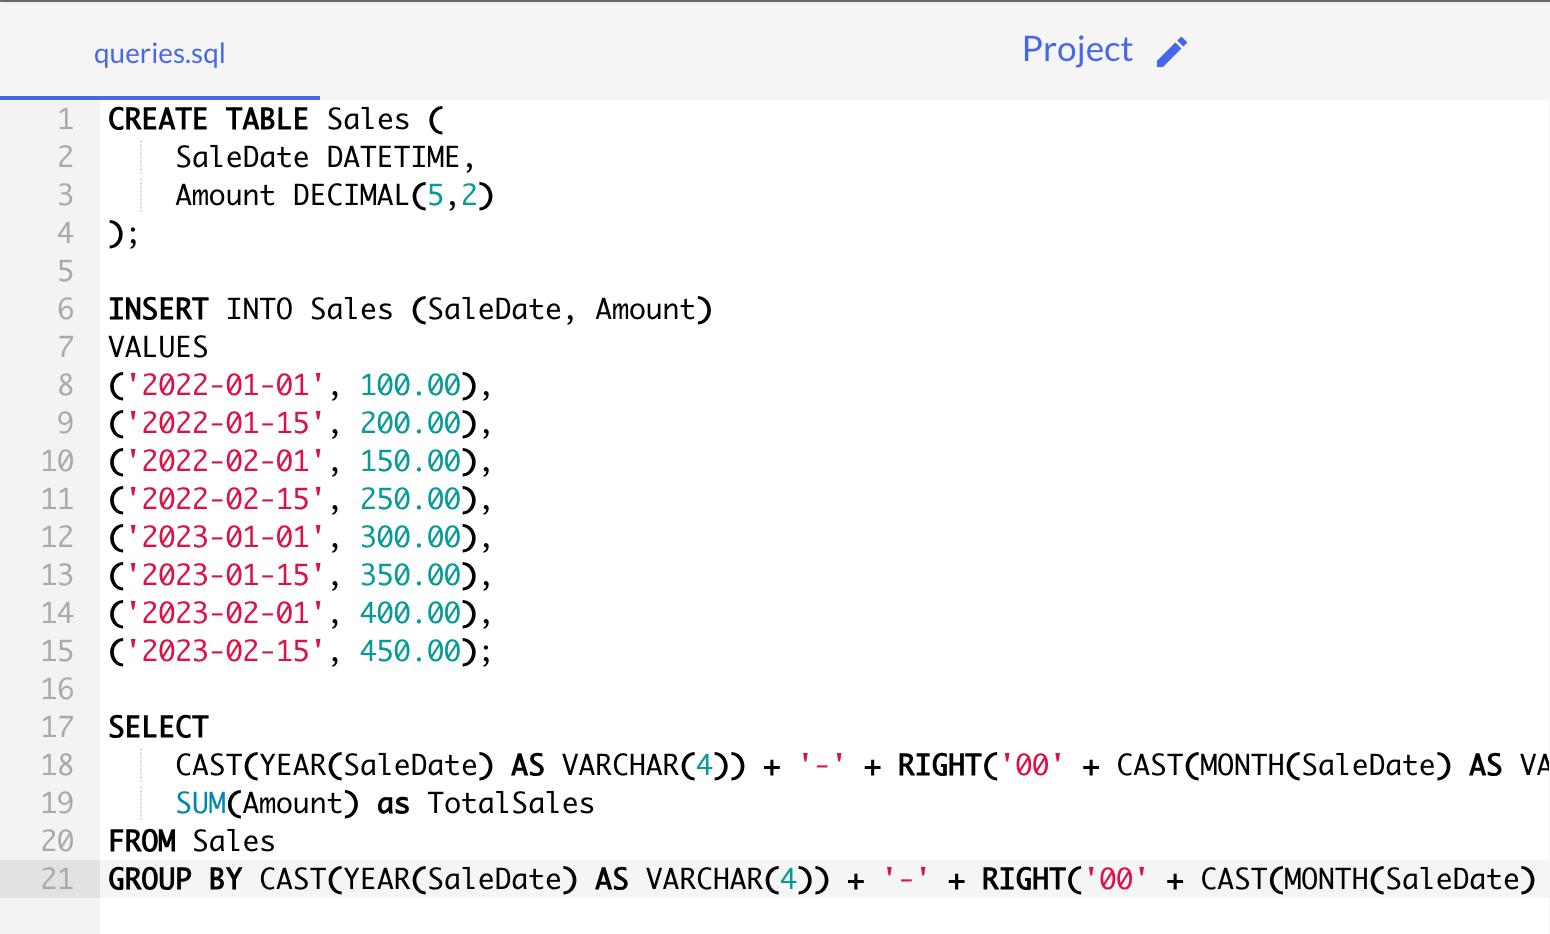 Code grouping values from a table using CAST with GROUP BY